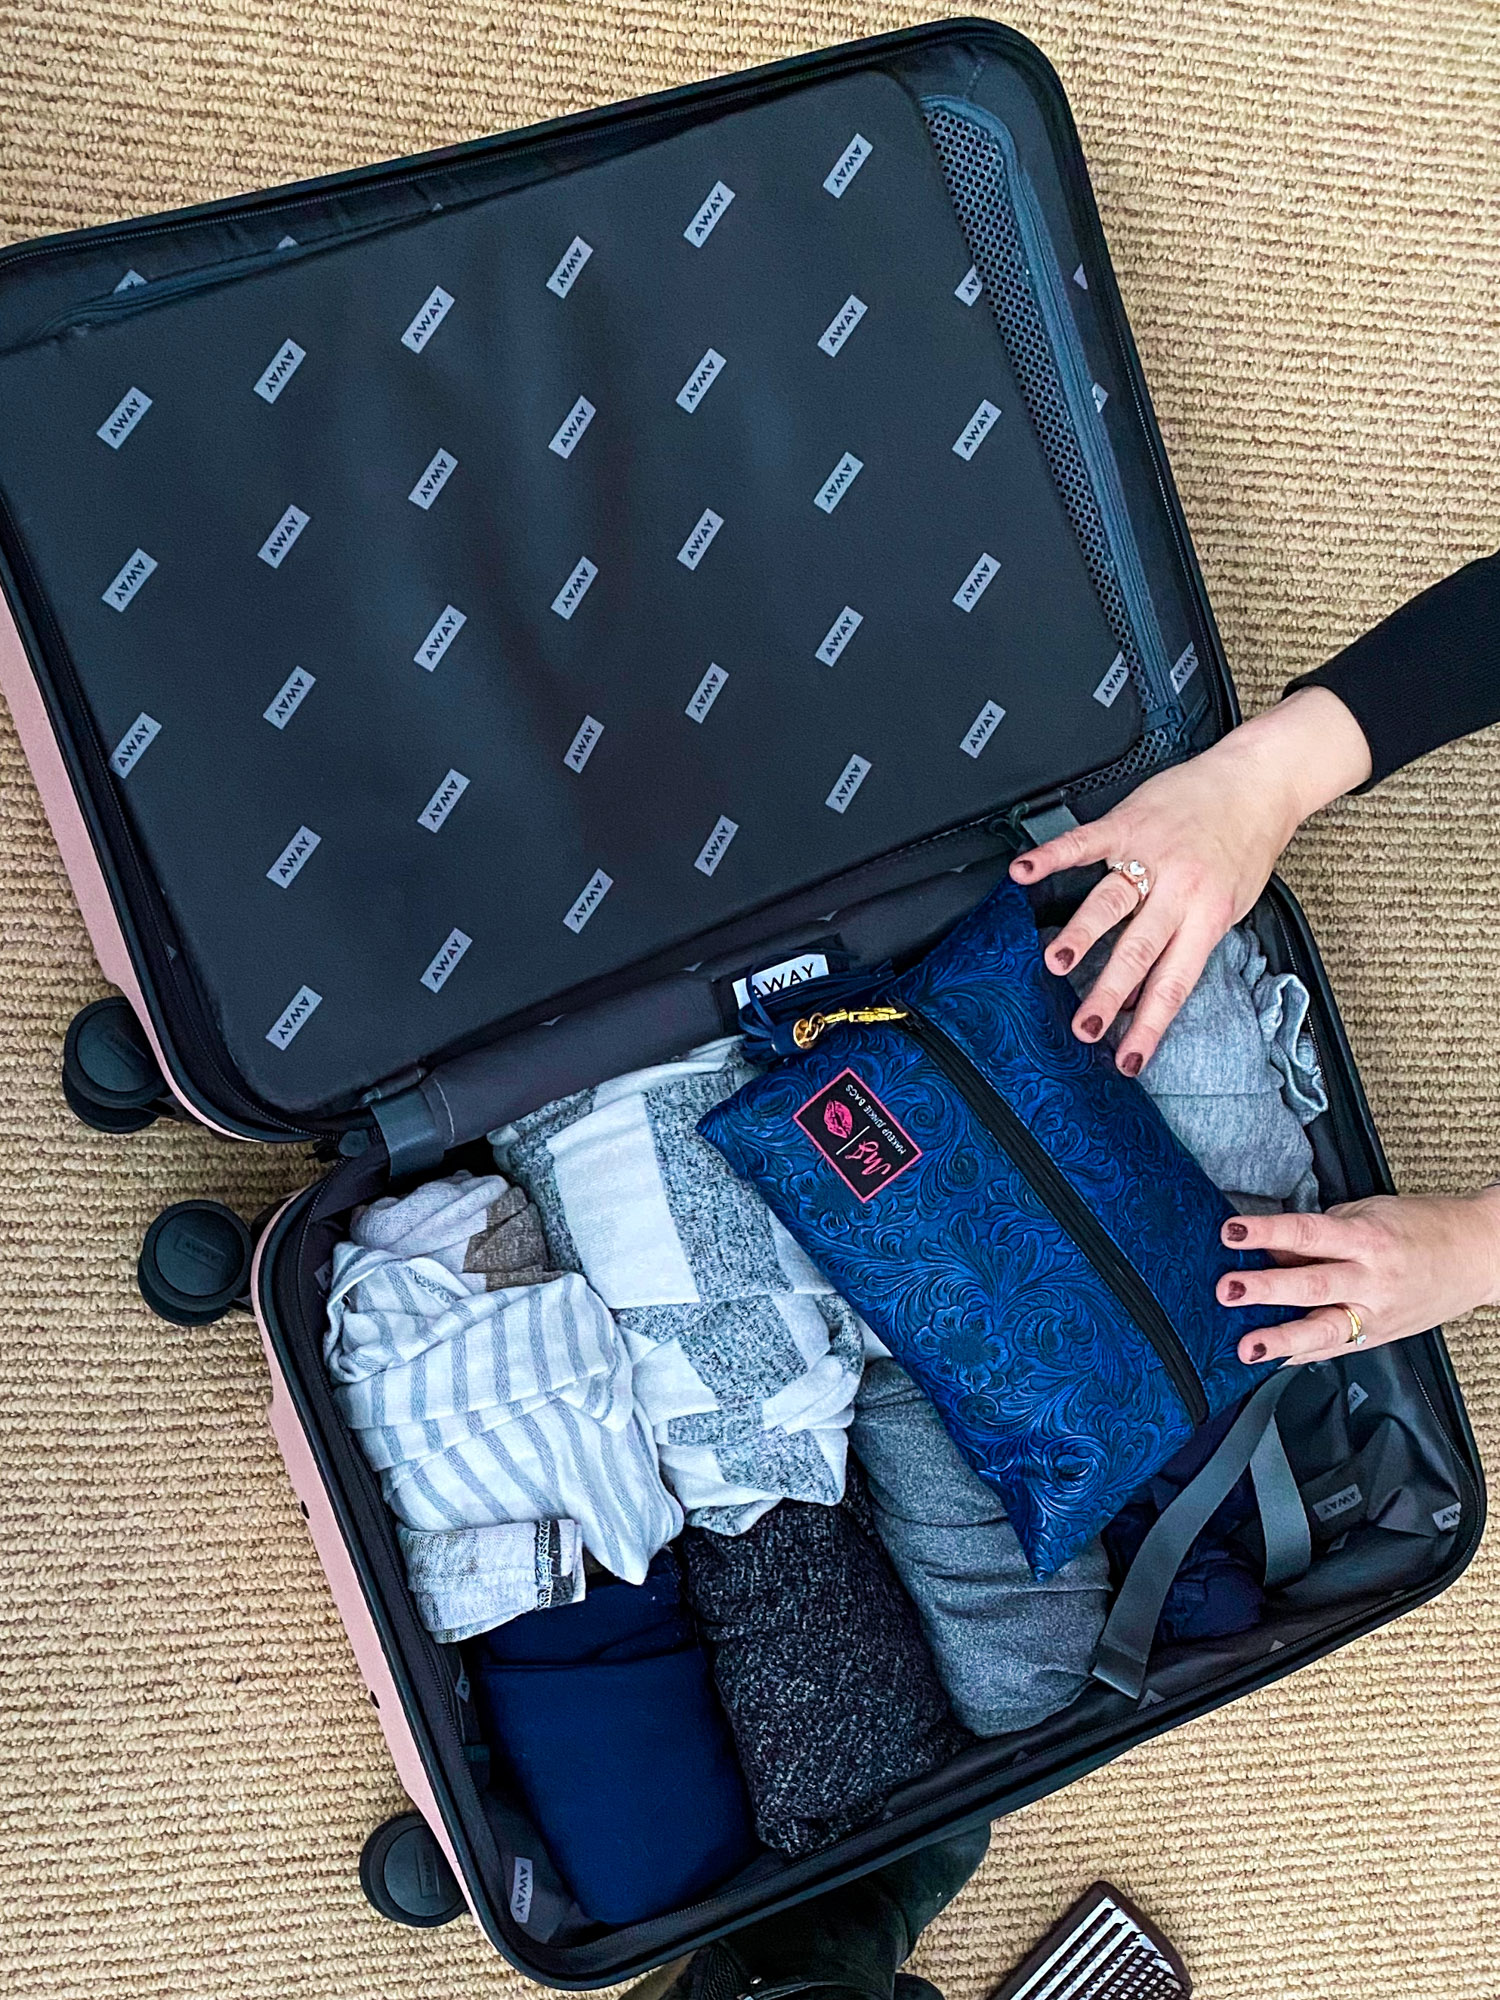 Tips for Packing Your Suitcase - Family Travel Magazine